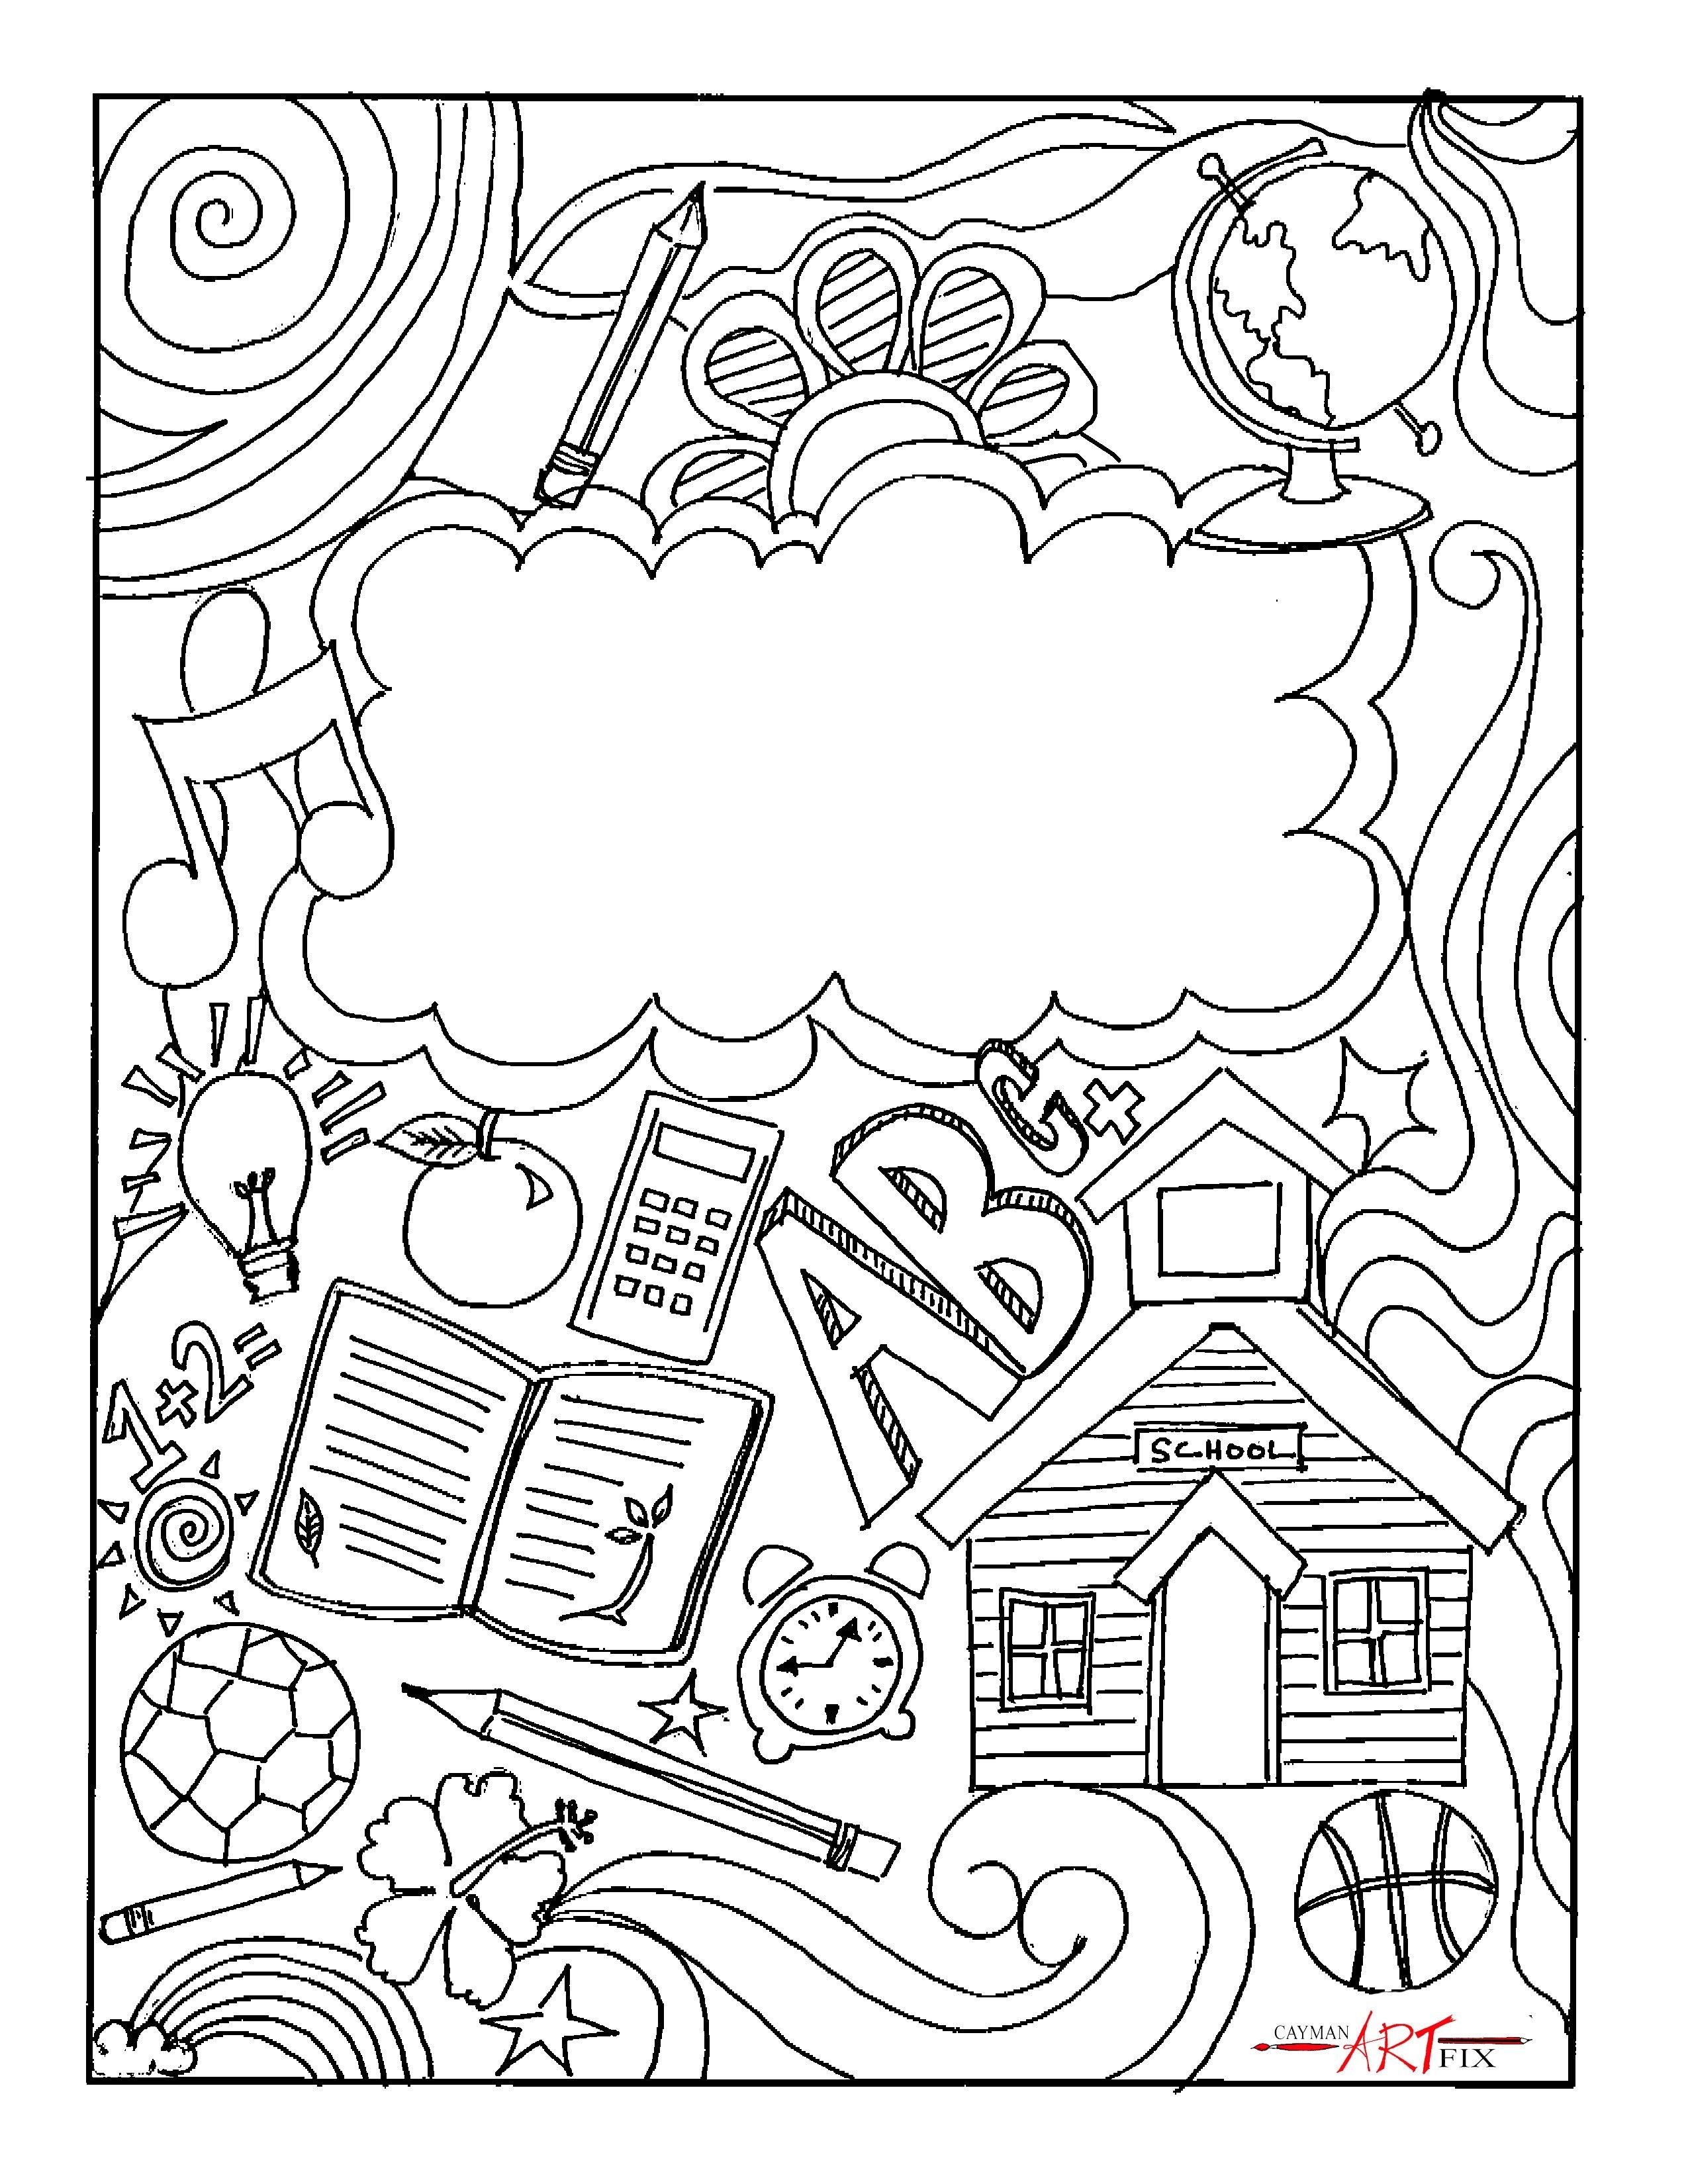 Binder Cover Coloring Page Binder Cover Printable Coloring Page - Free Printable Binder Covers To Color